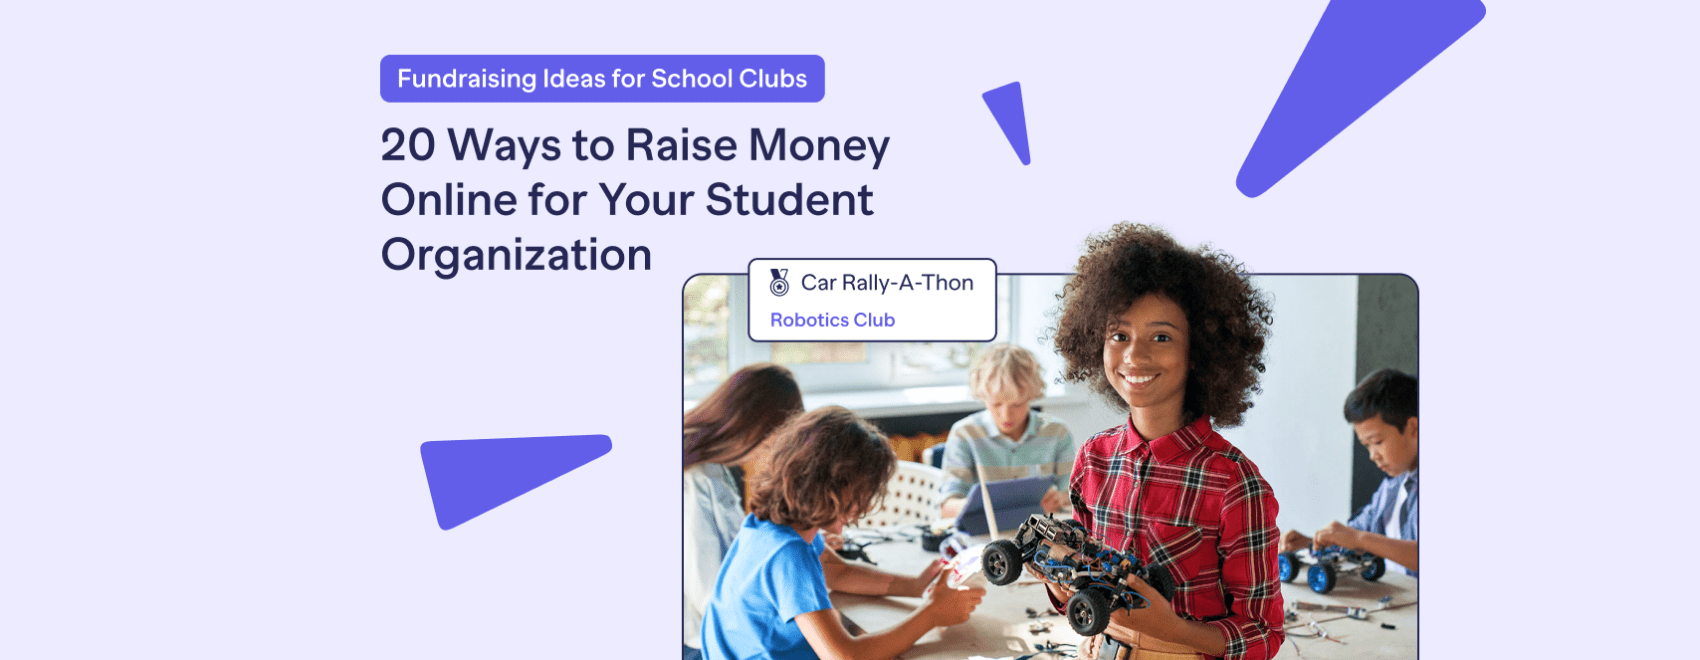 Fundraising Ideas for School Clubs